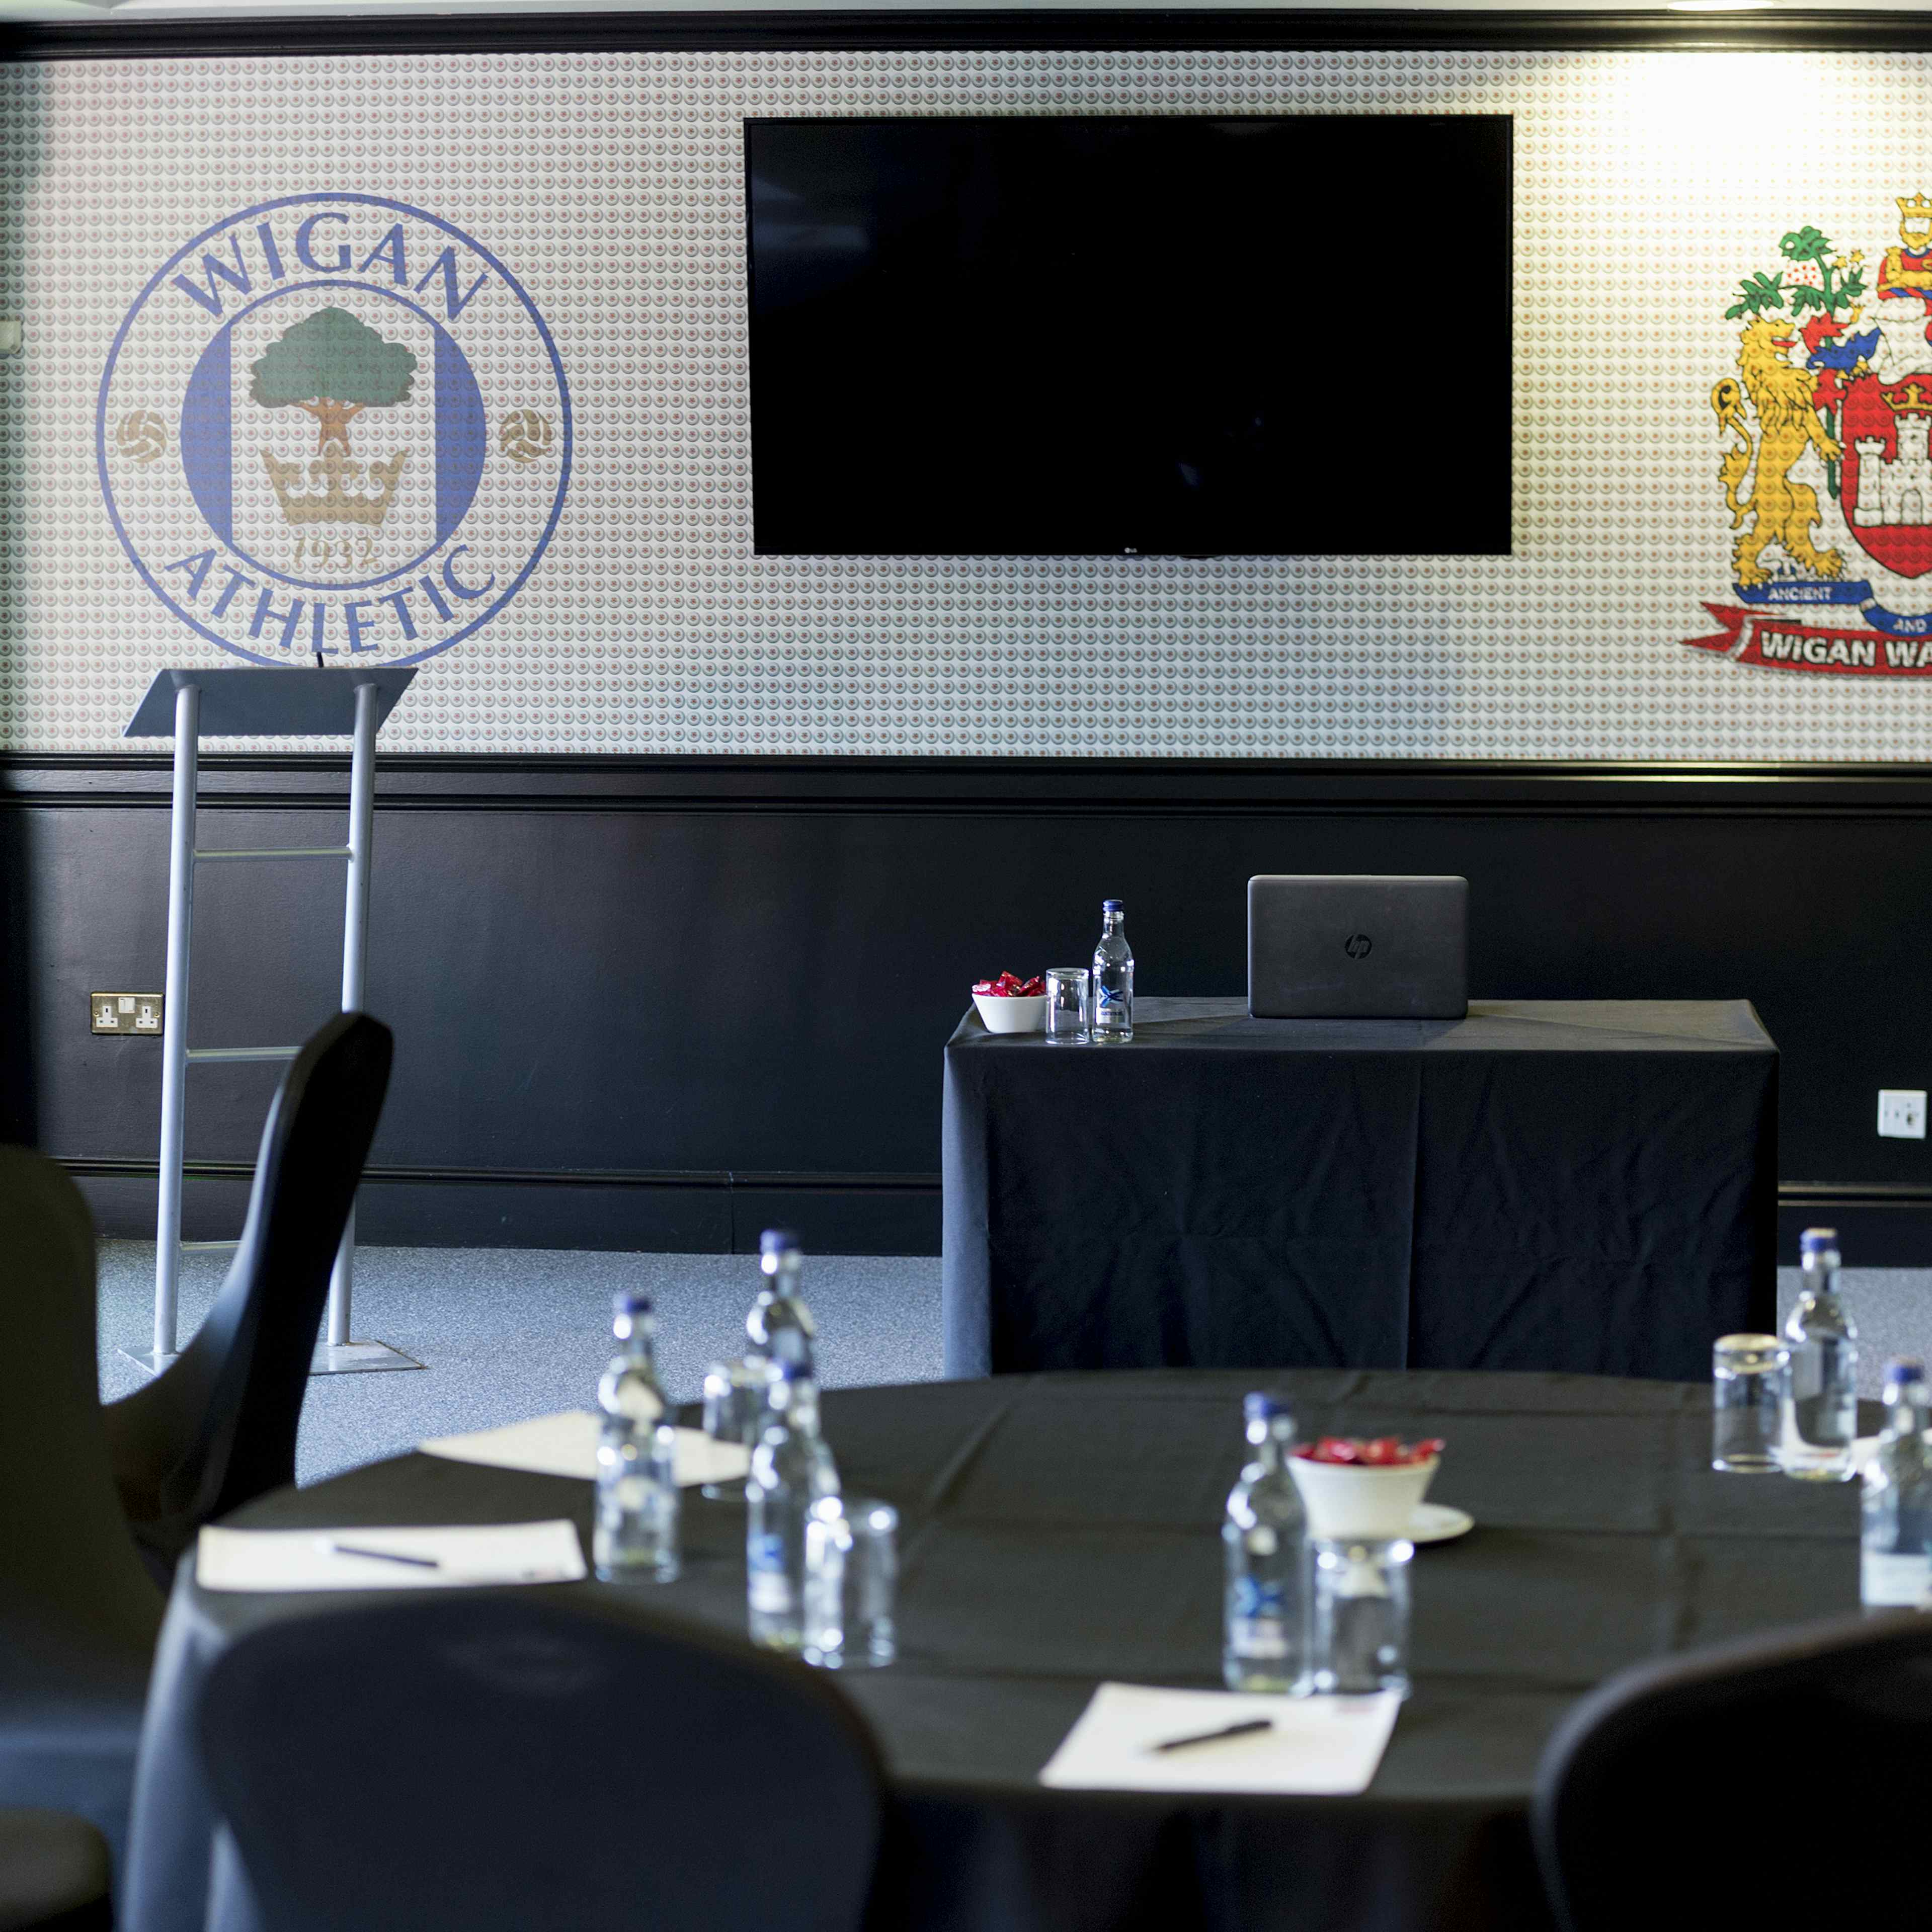 The DW Stadium - The Carling Lounge image 3